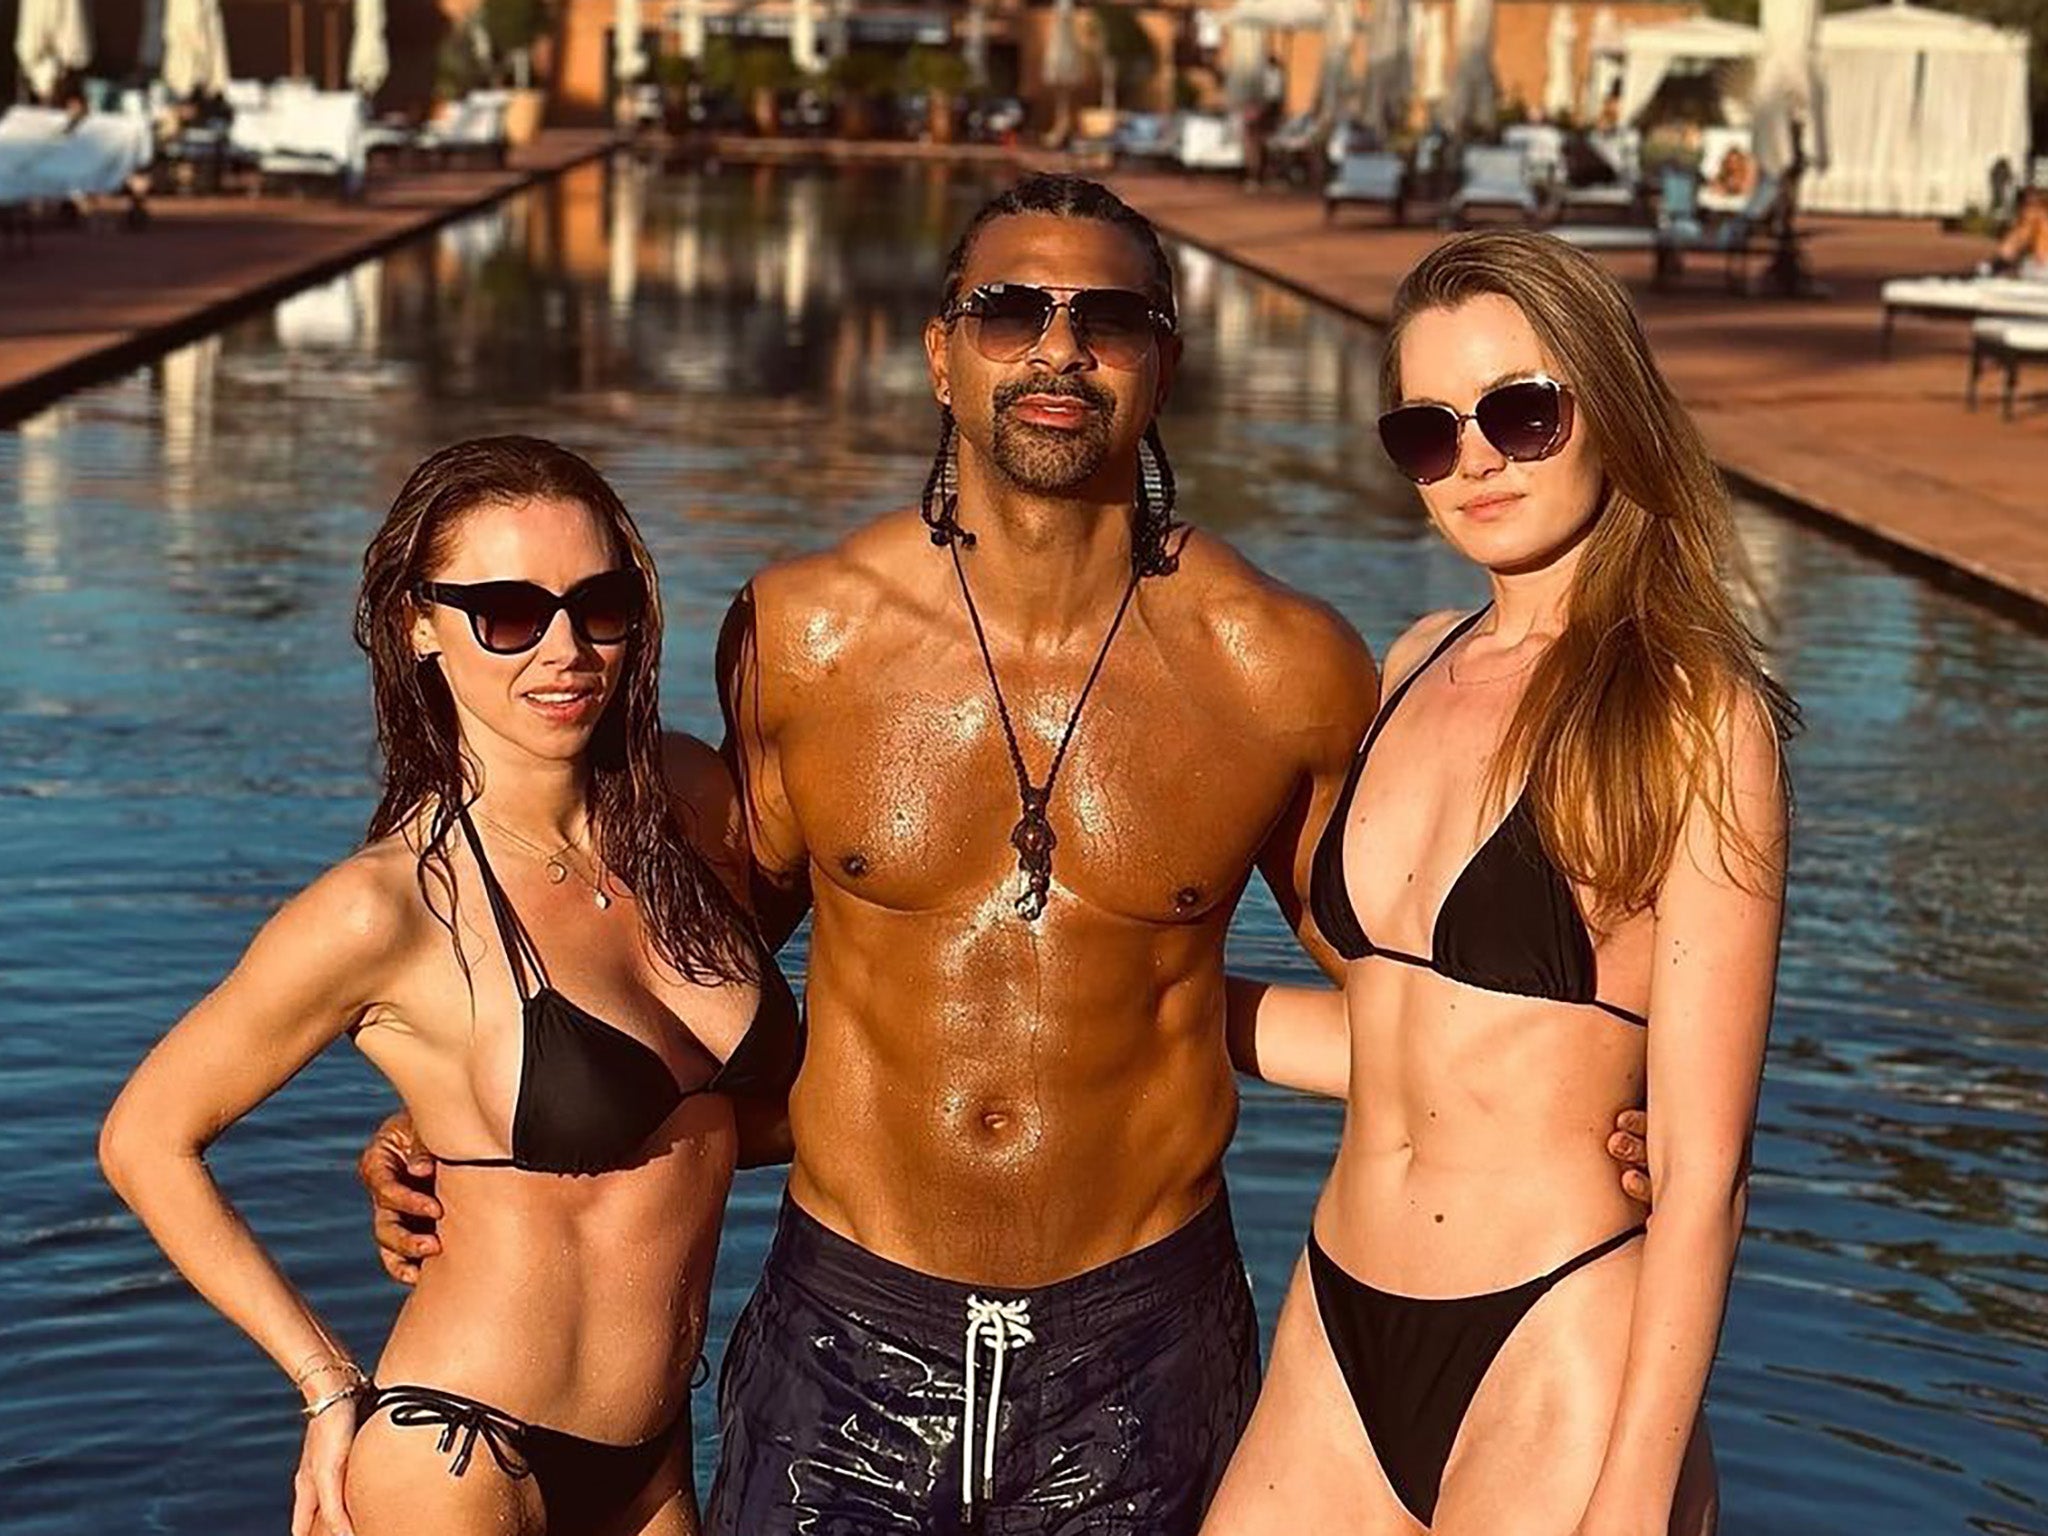 David Haye, Una Healy and Sian Osborne Can throuples or triad relationships really work? The Independent pic